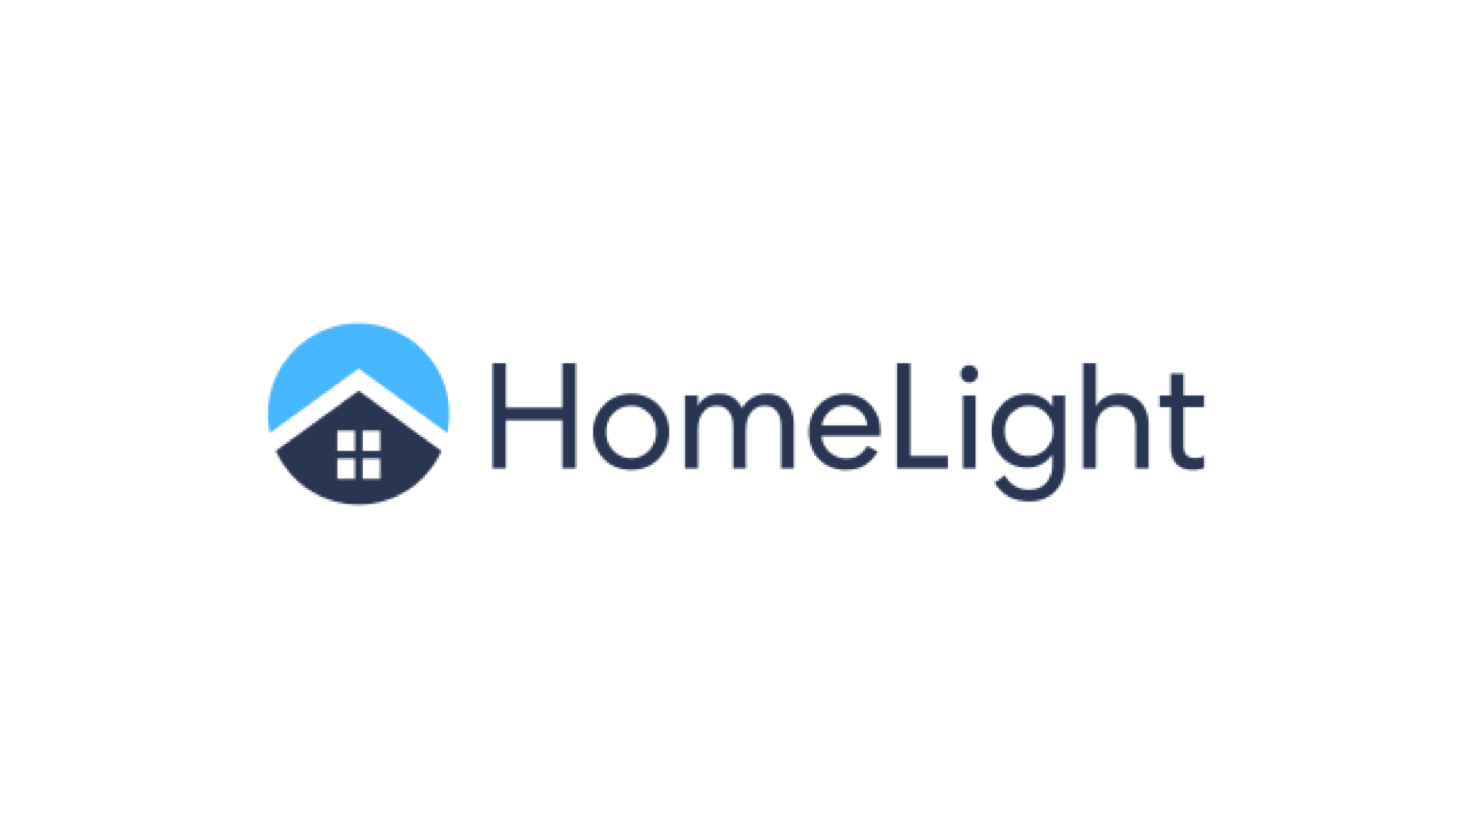 homelight ranks in the top 7% of the fastest-growing companies in america, according to inc.